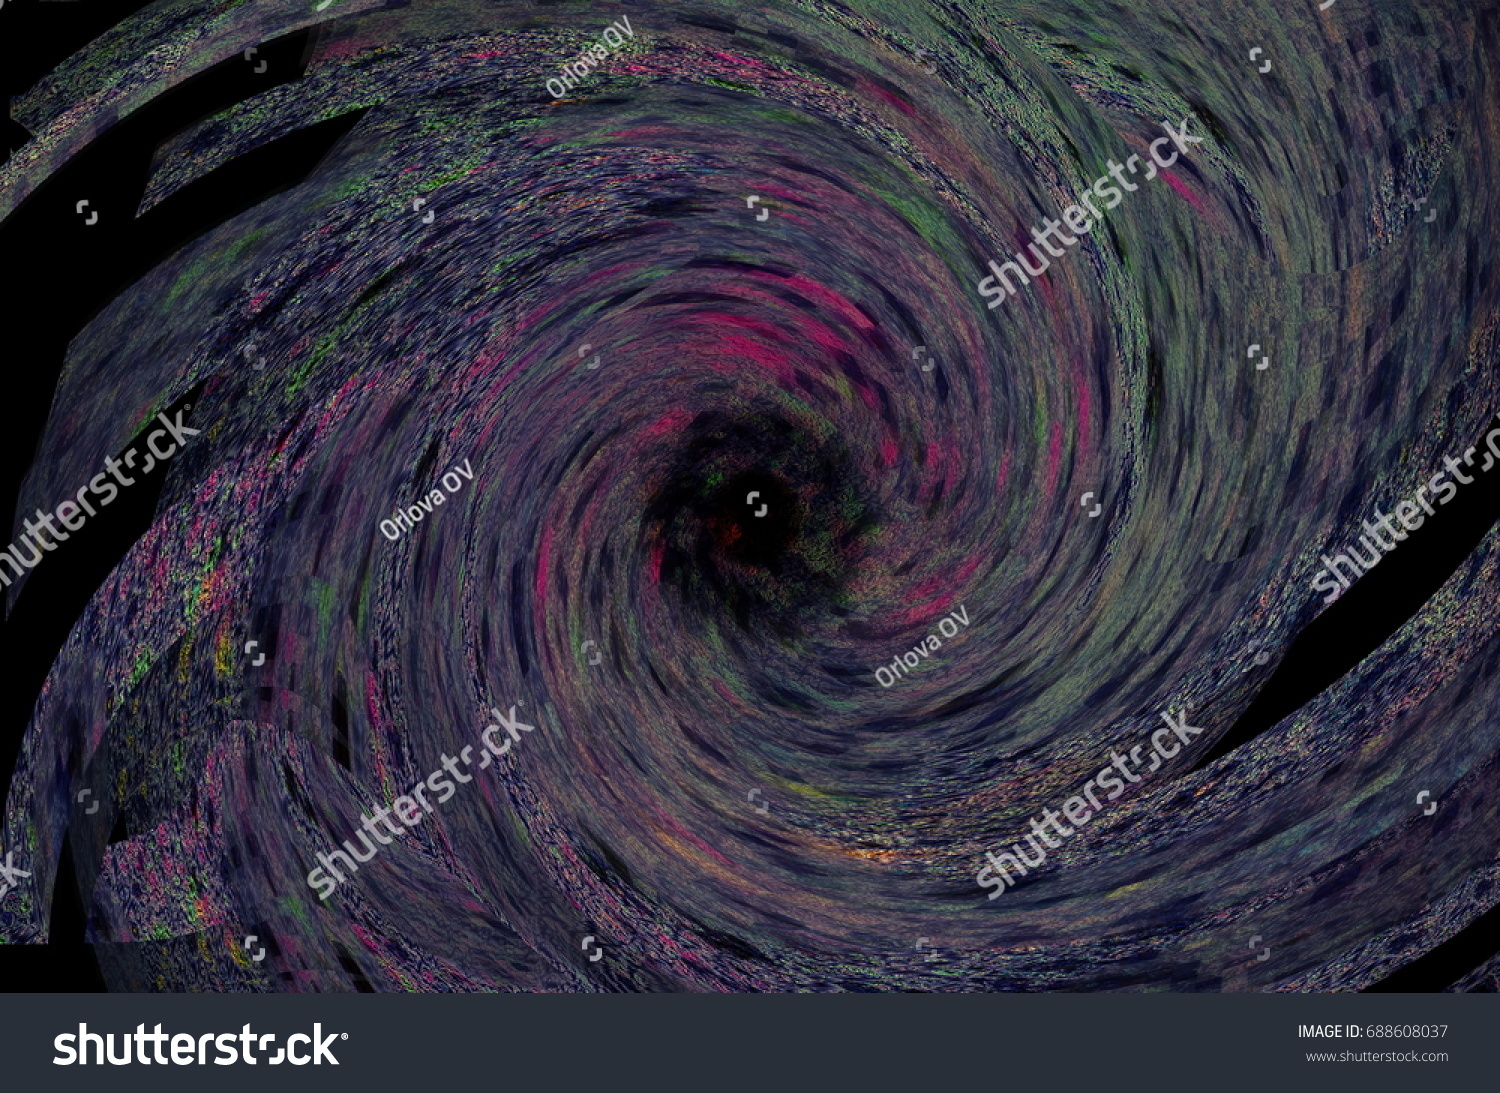 stock-photo-space-black-hole-texture-for-the-monitor-desktop-wallpapers-688608037.jpg